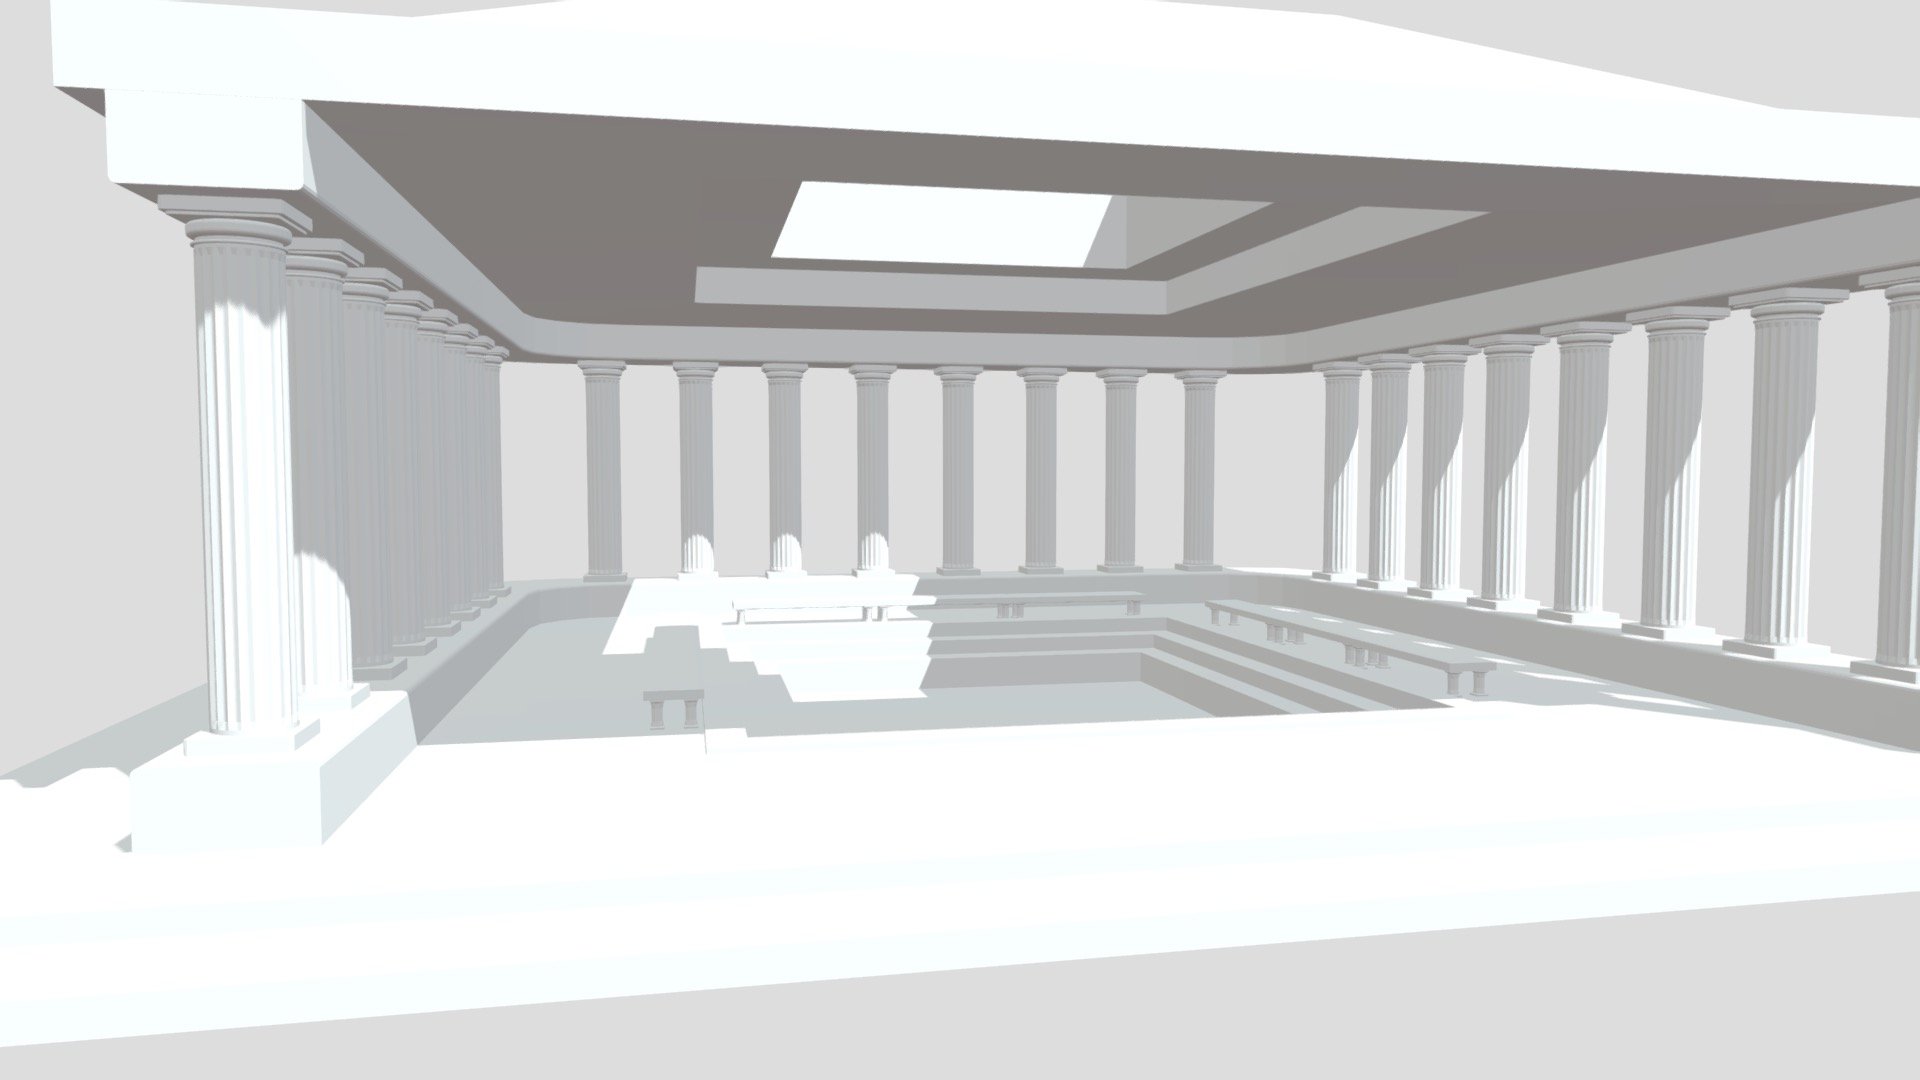 Simplistic Roman or Greek style bathhouse with benches. Untextured 3d model